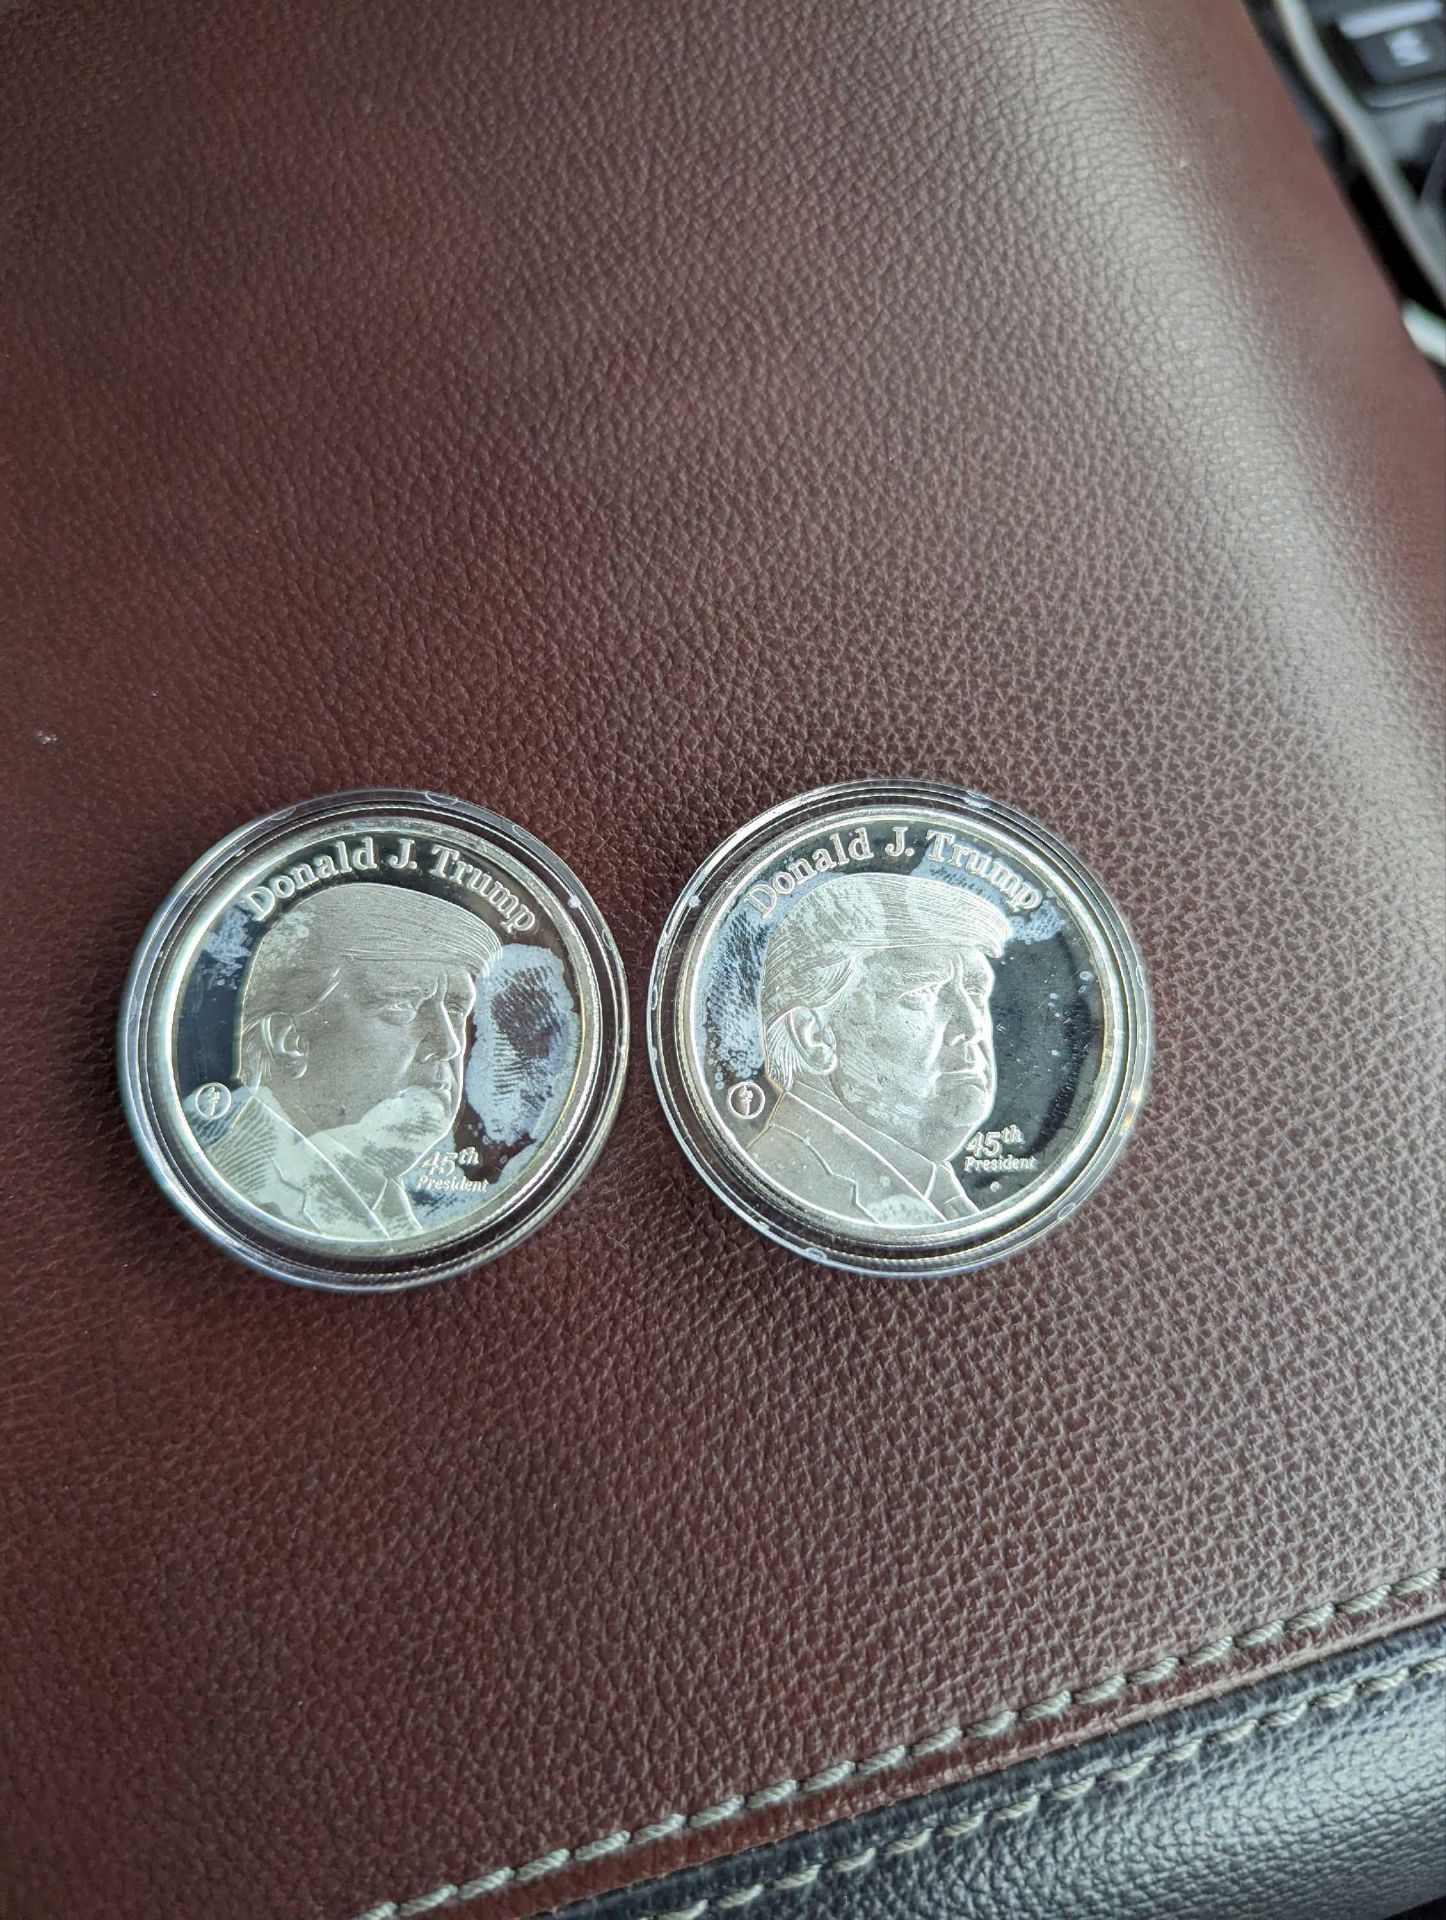 2 trump silver coins - Image 6 of 8